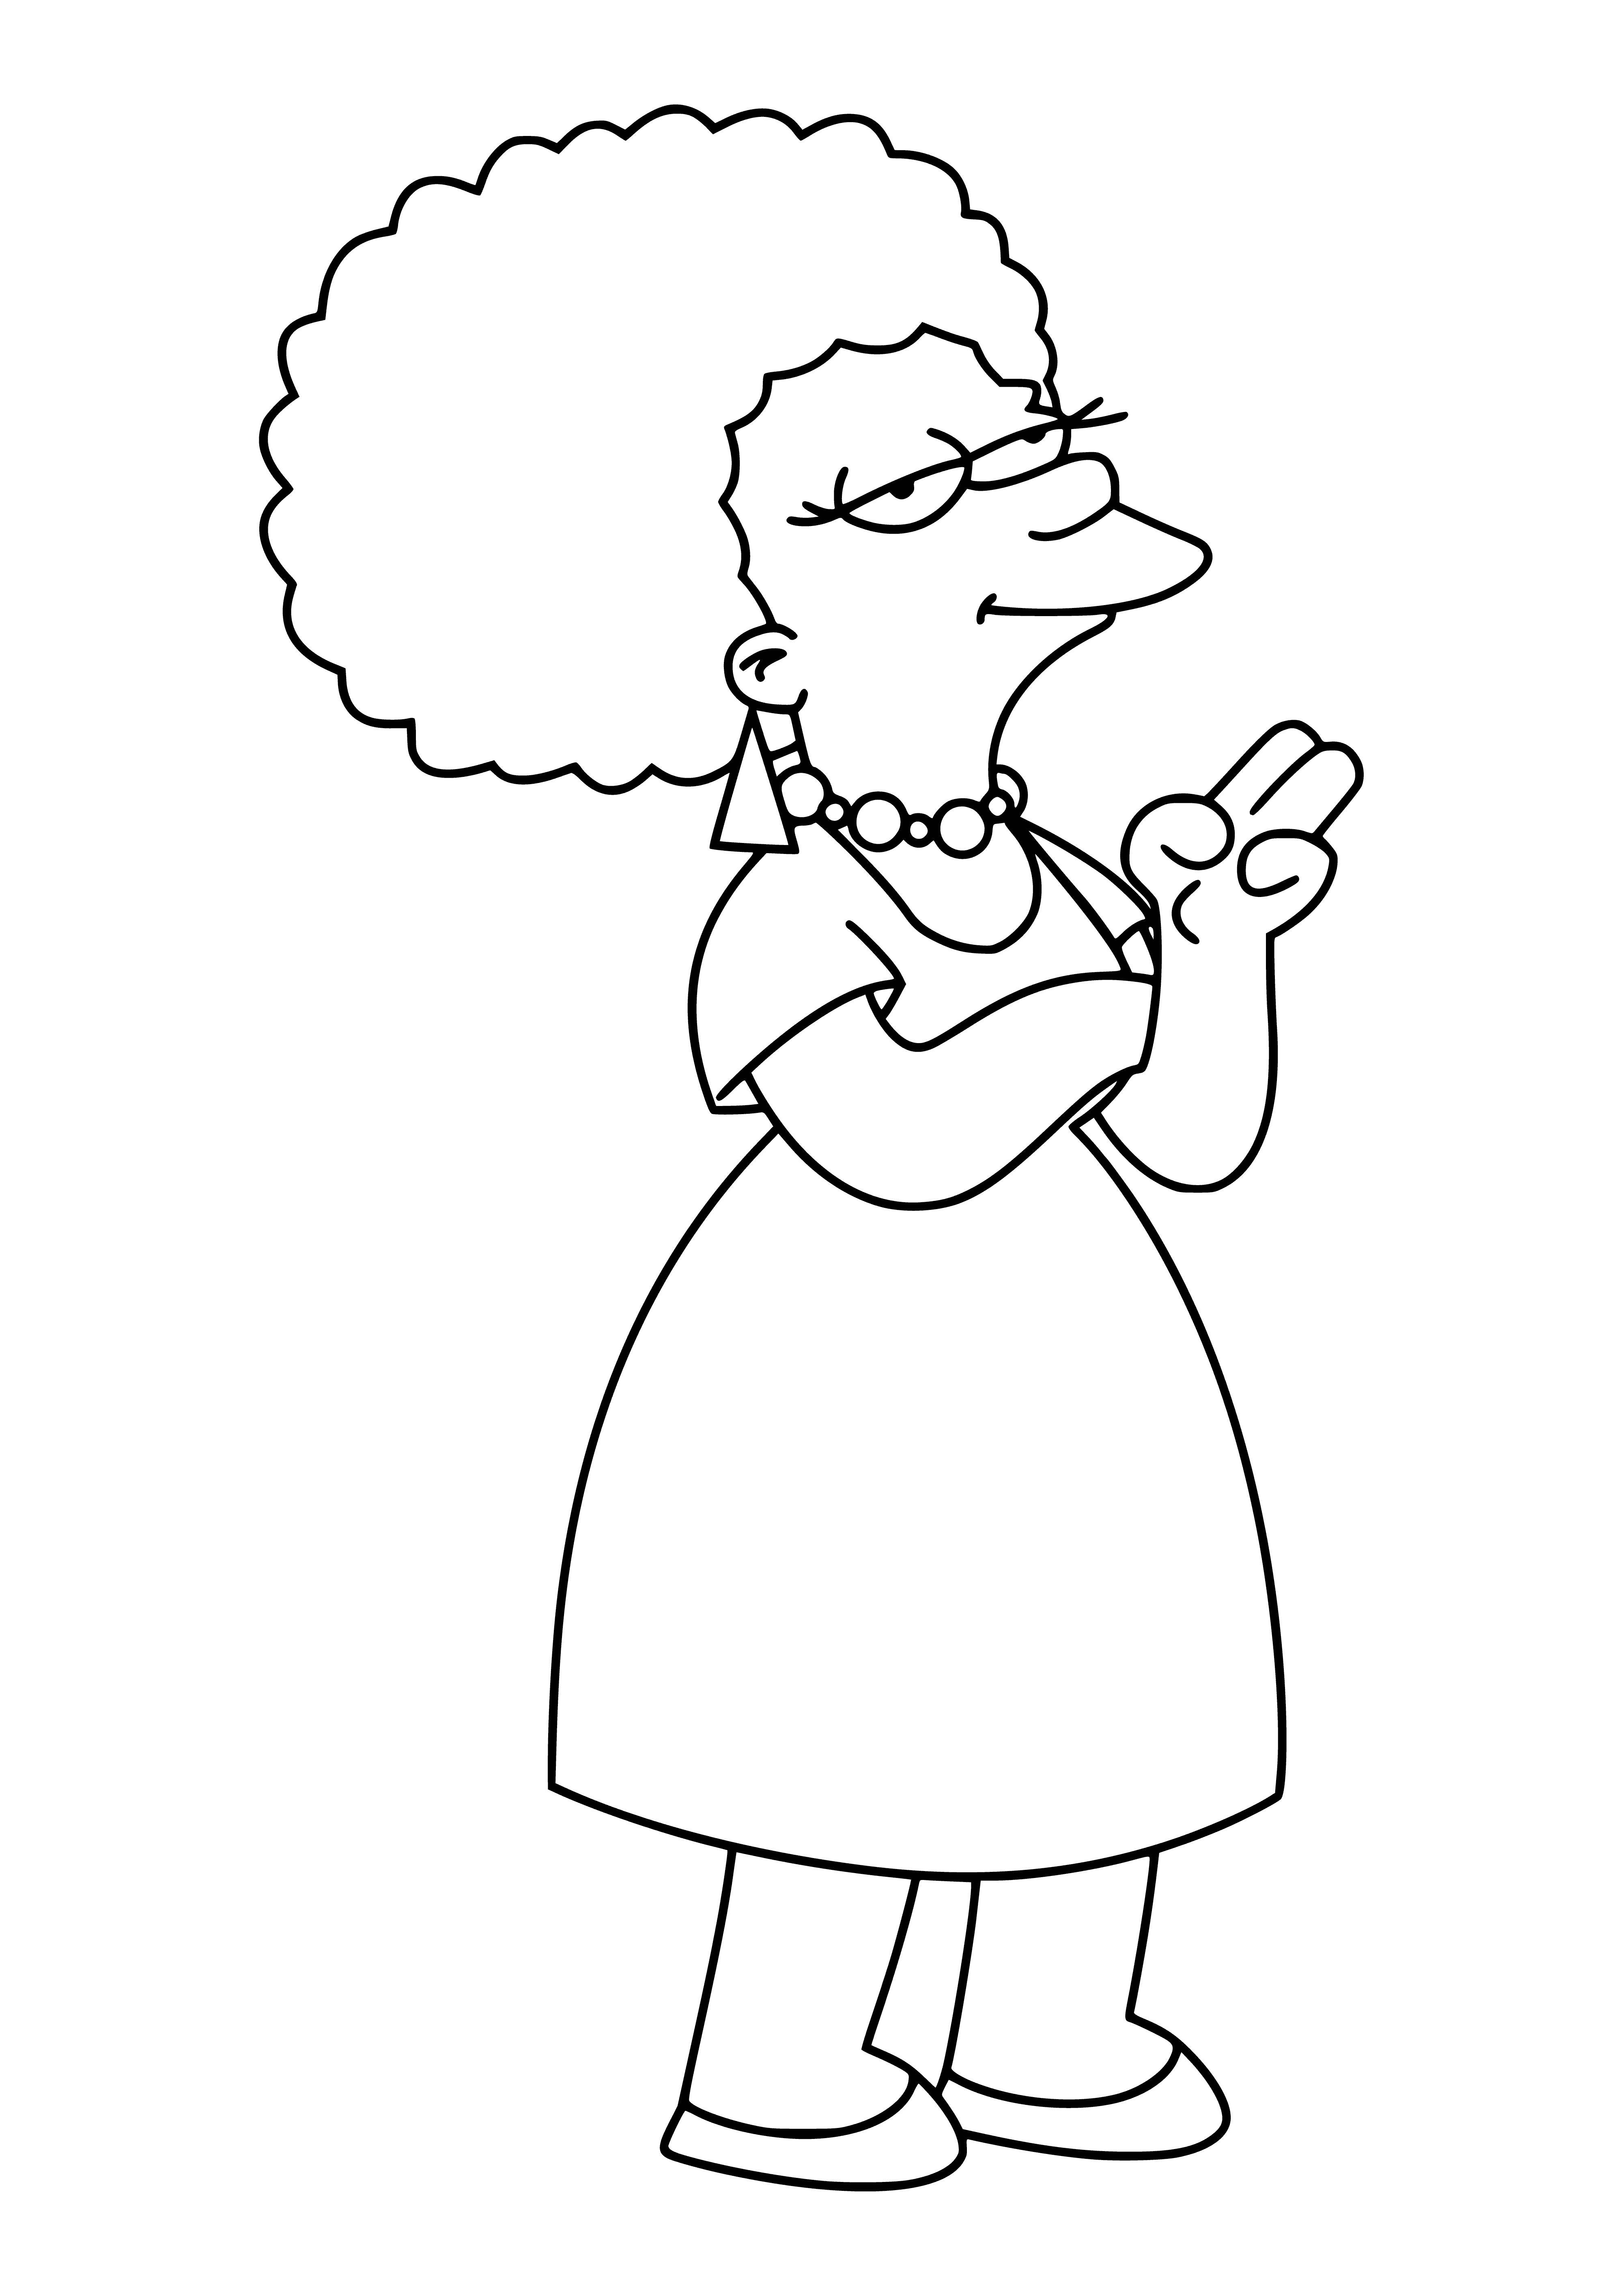 coloring page: Two women coloring page: Patty Bouvier (bald, yellow skin, blue eyes, purple lipstick) and other woman (green dress, white collar).